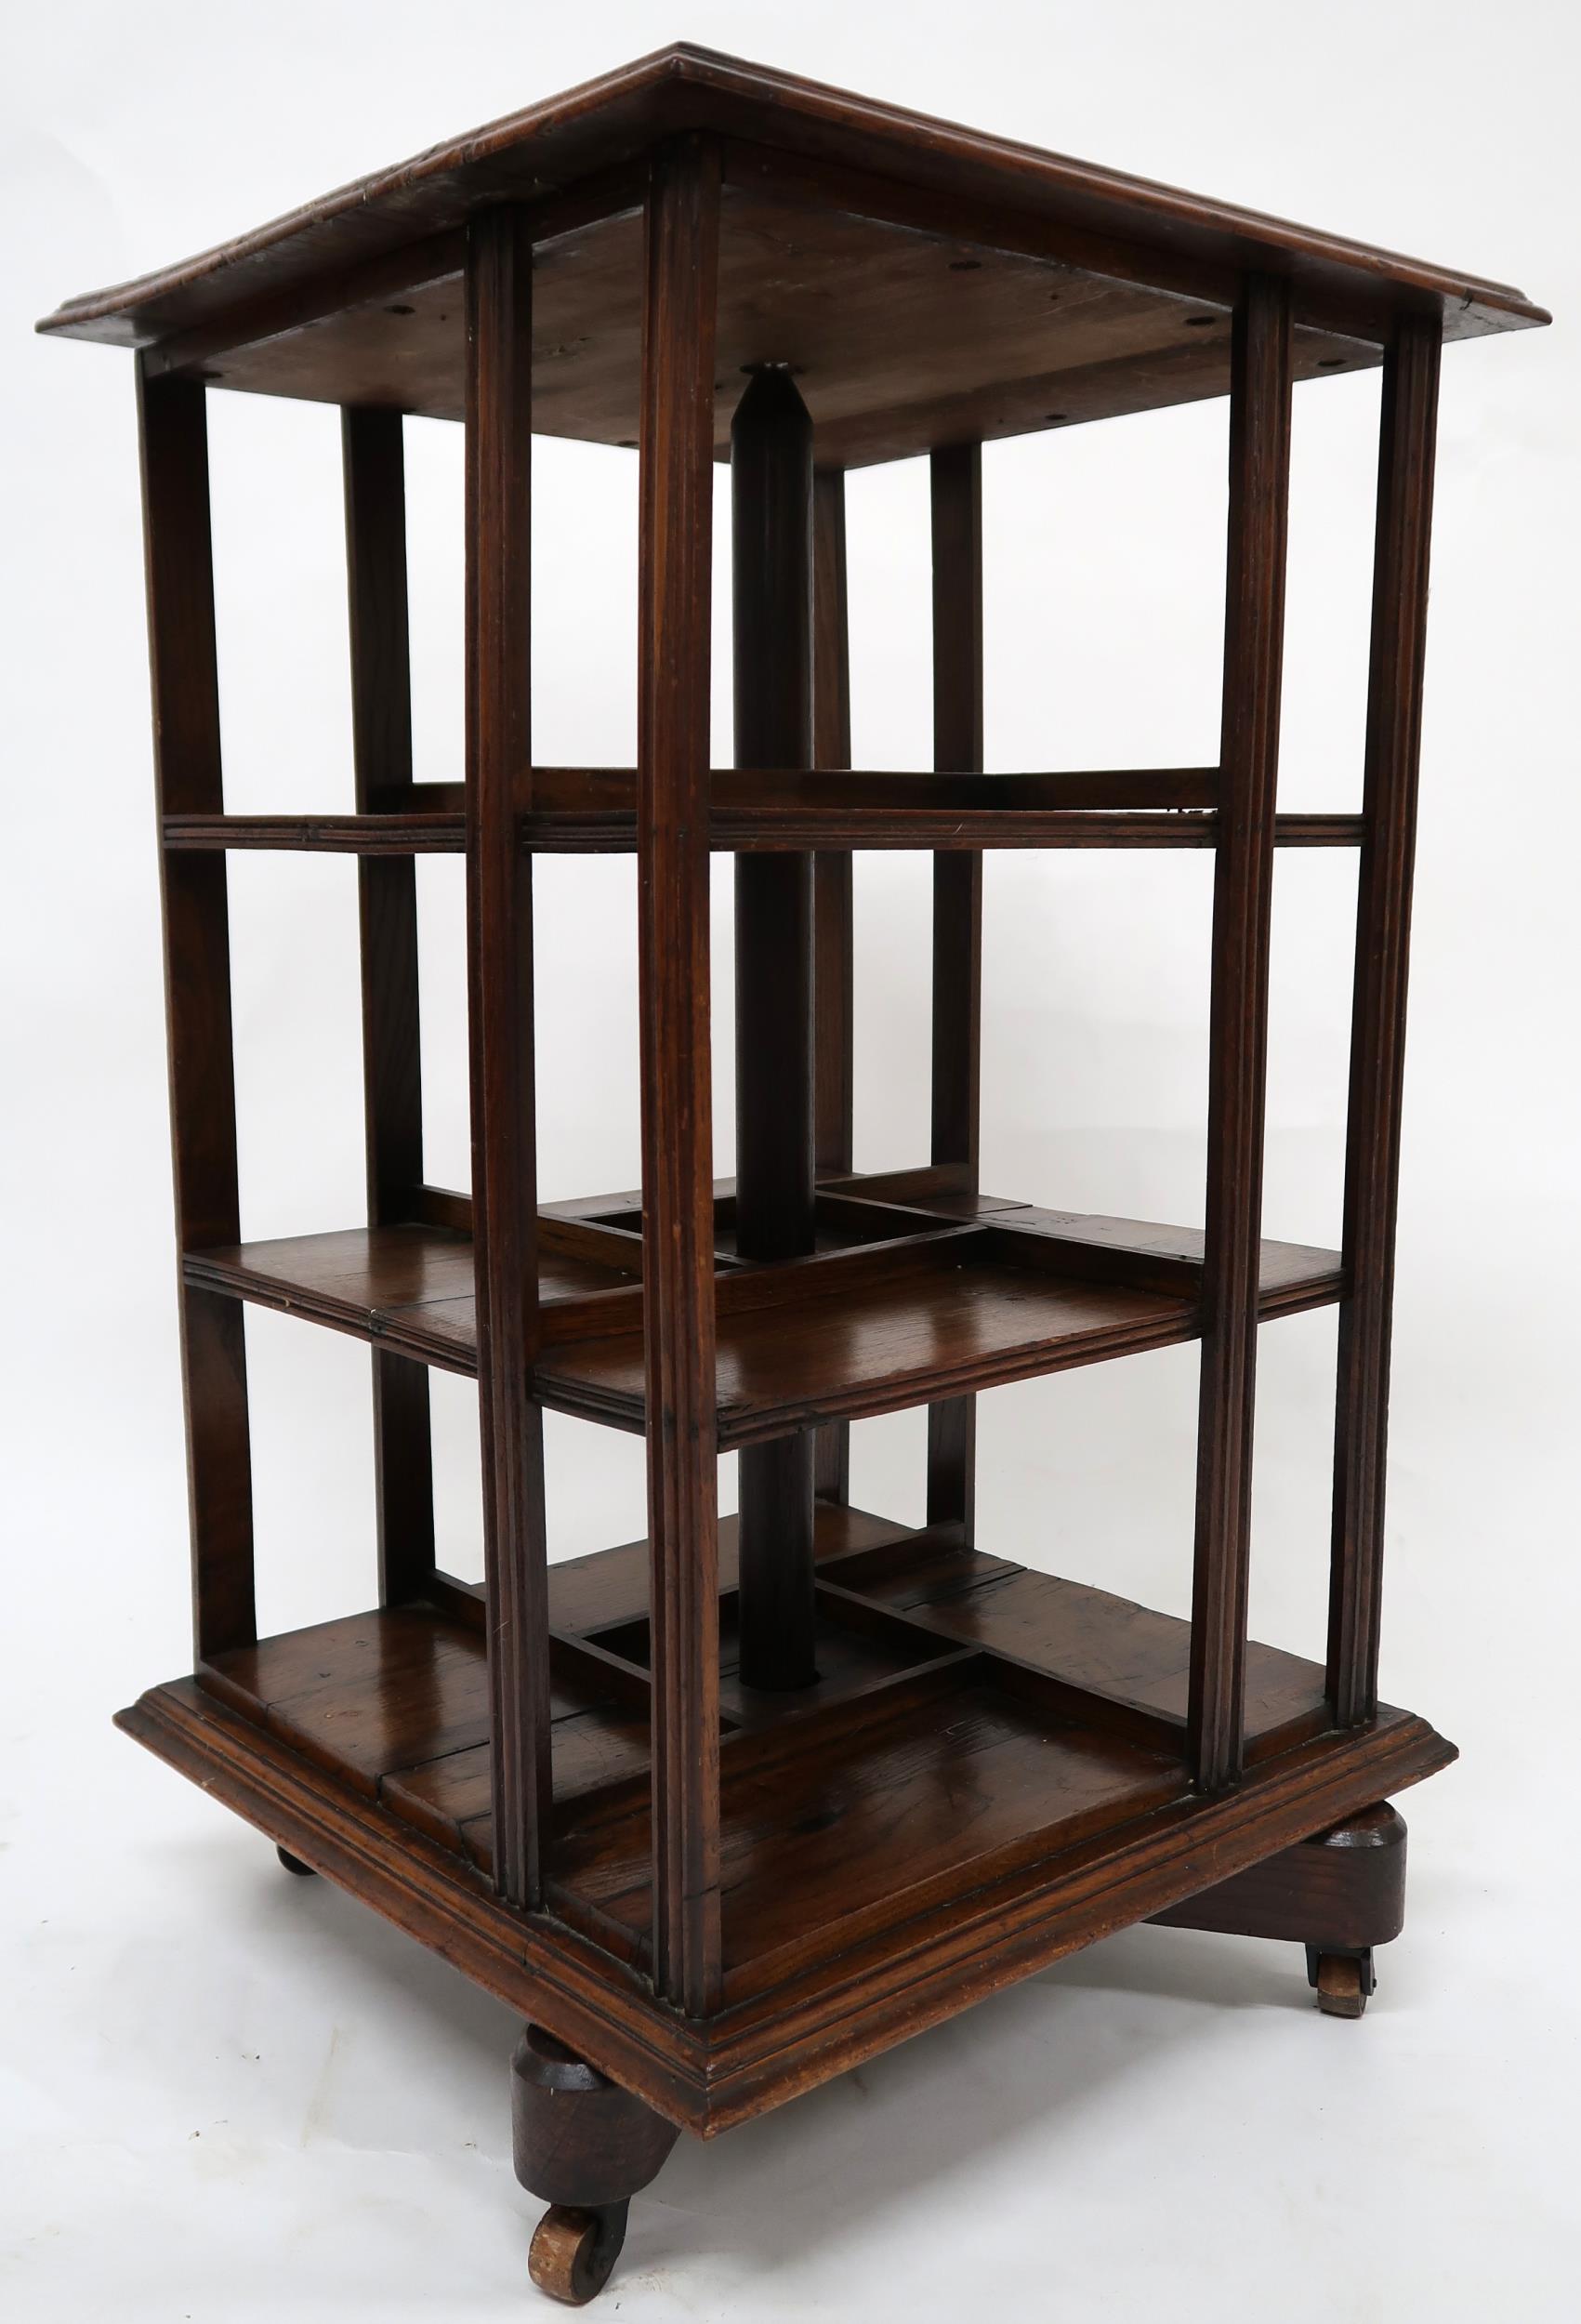 AN EARLY 20TH CENTURY OAK AND PINE GOODALL, LAMB & HEIGHWAY LTD MANCHESTER REVOLVING BOOKCASE - Image 8 of 9